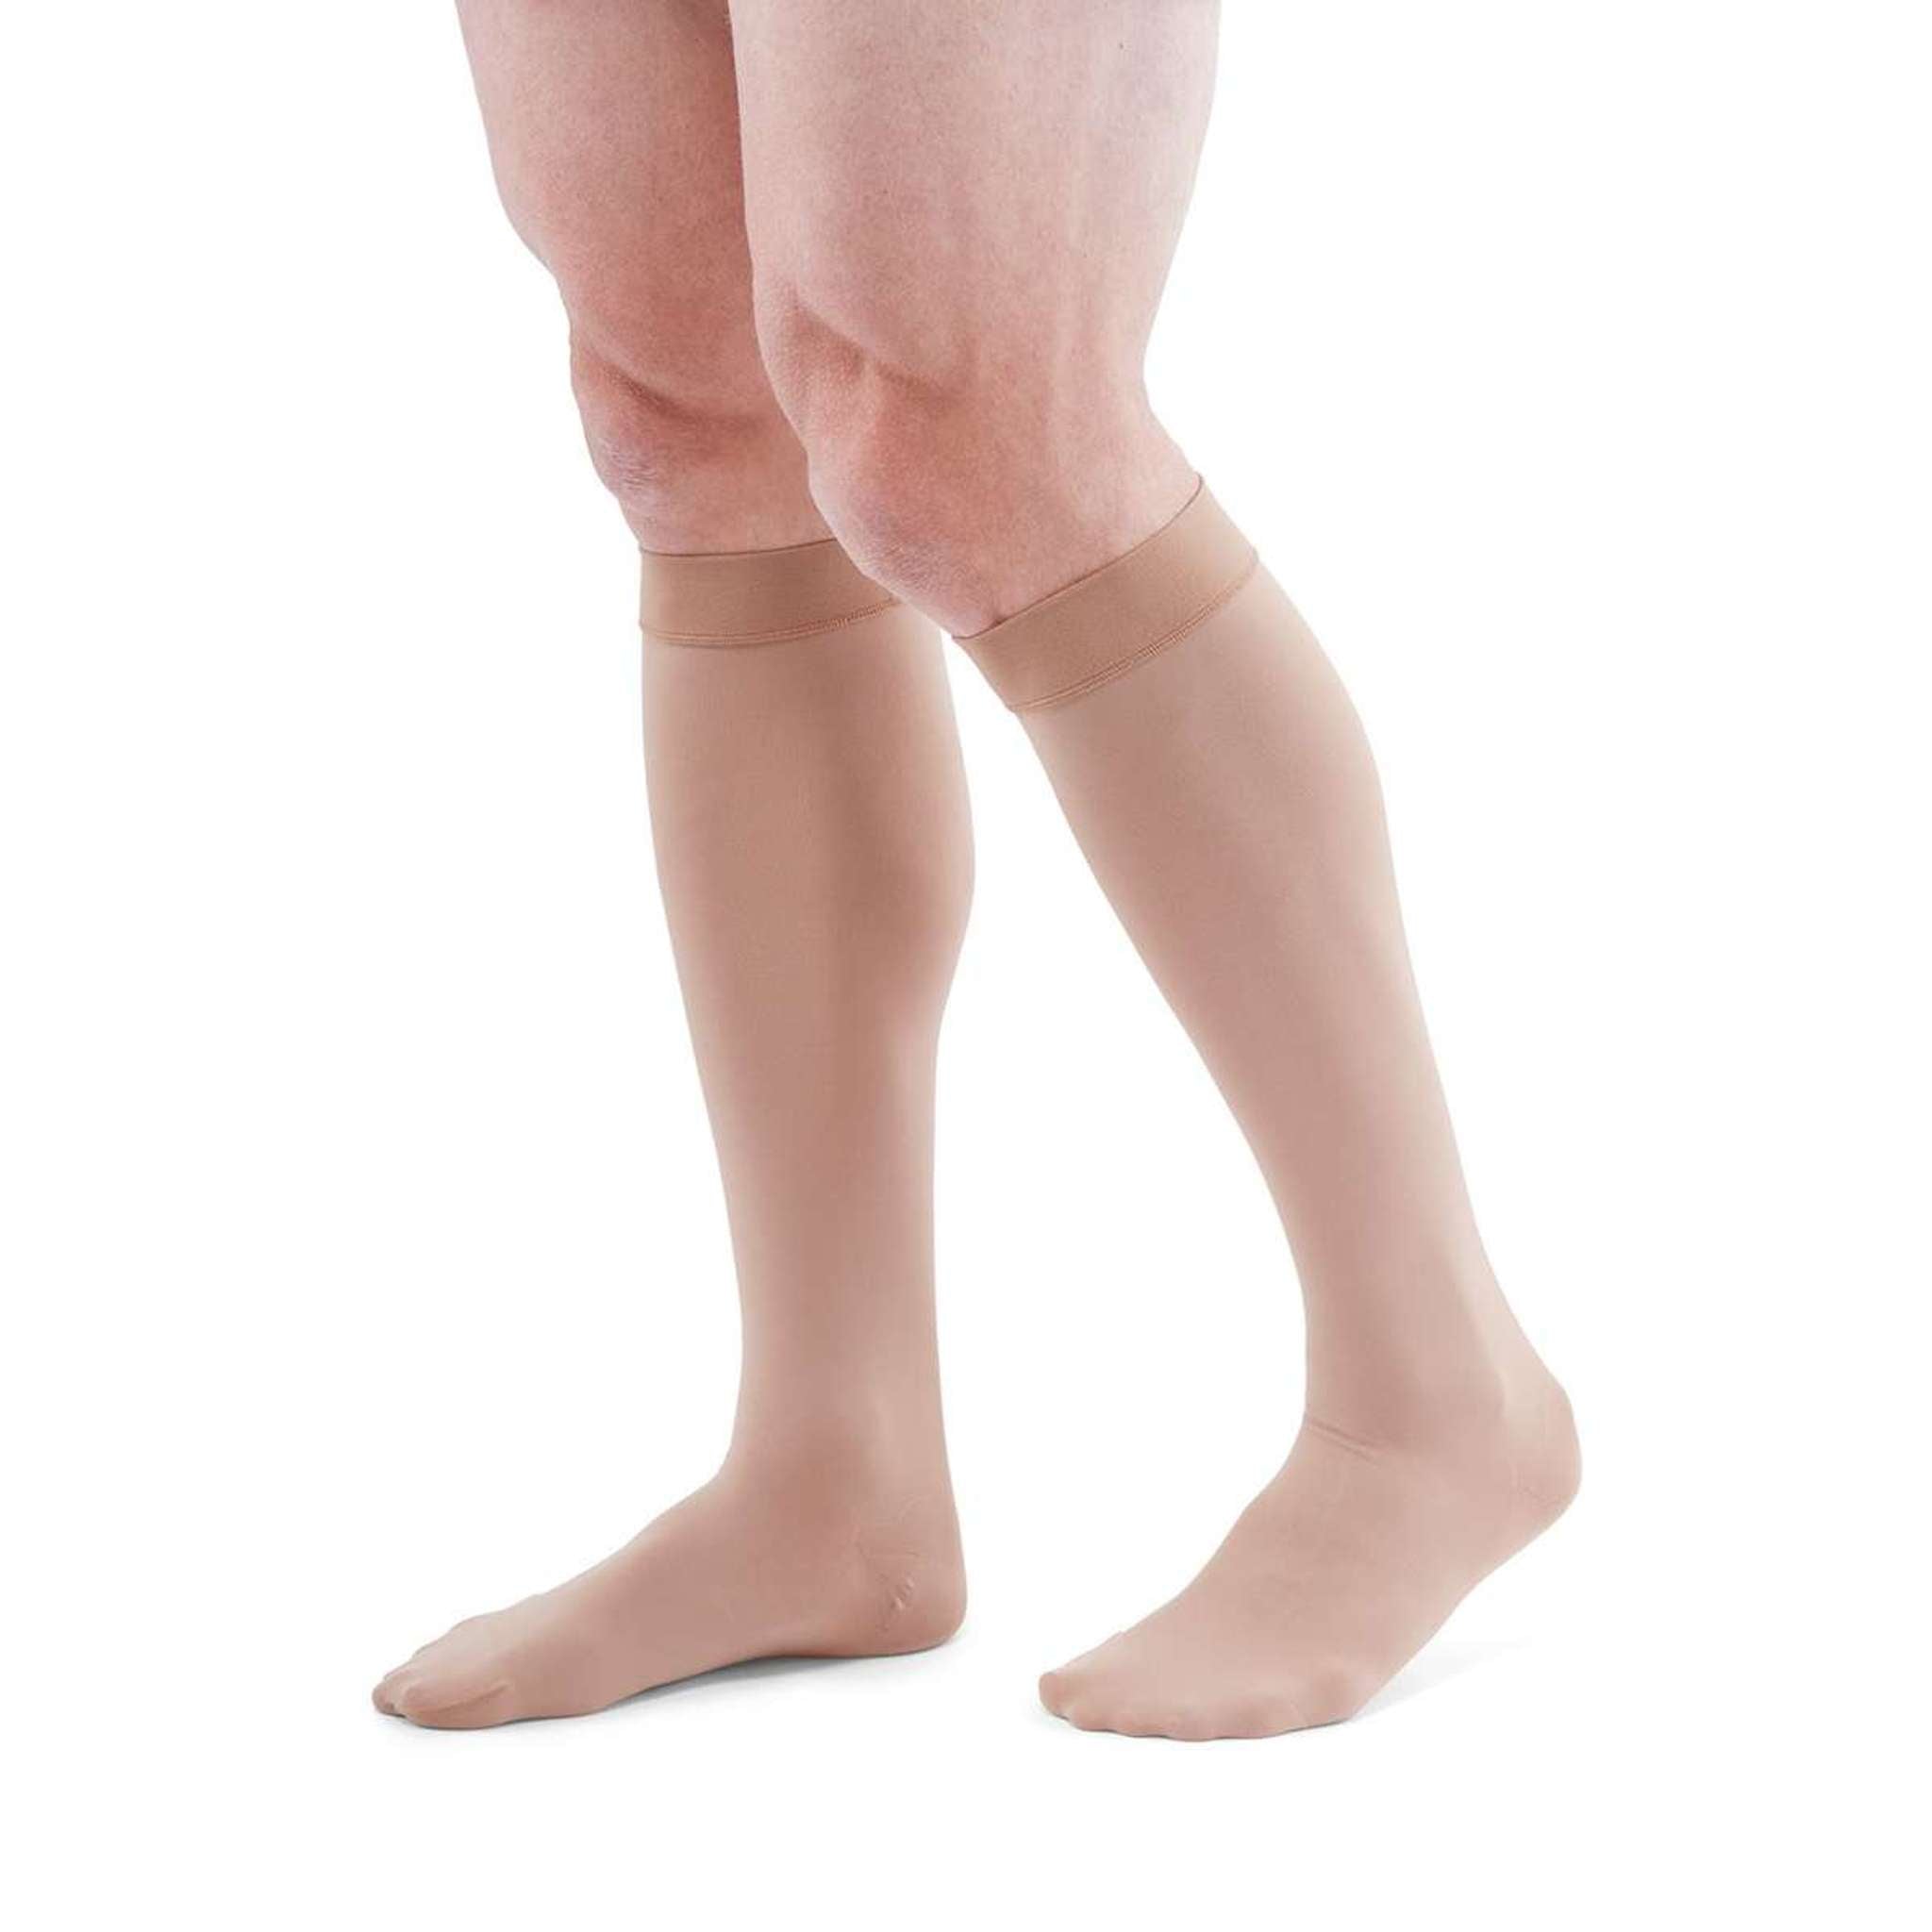 duomed, Below Knee, Medical Compression Stockings